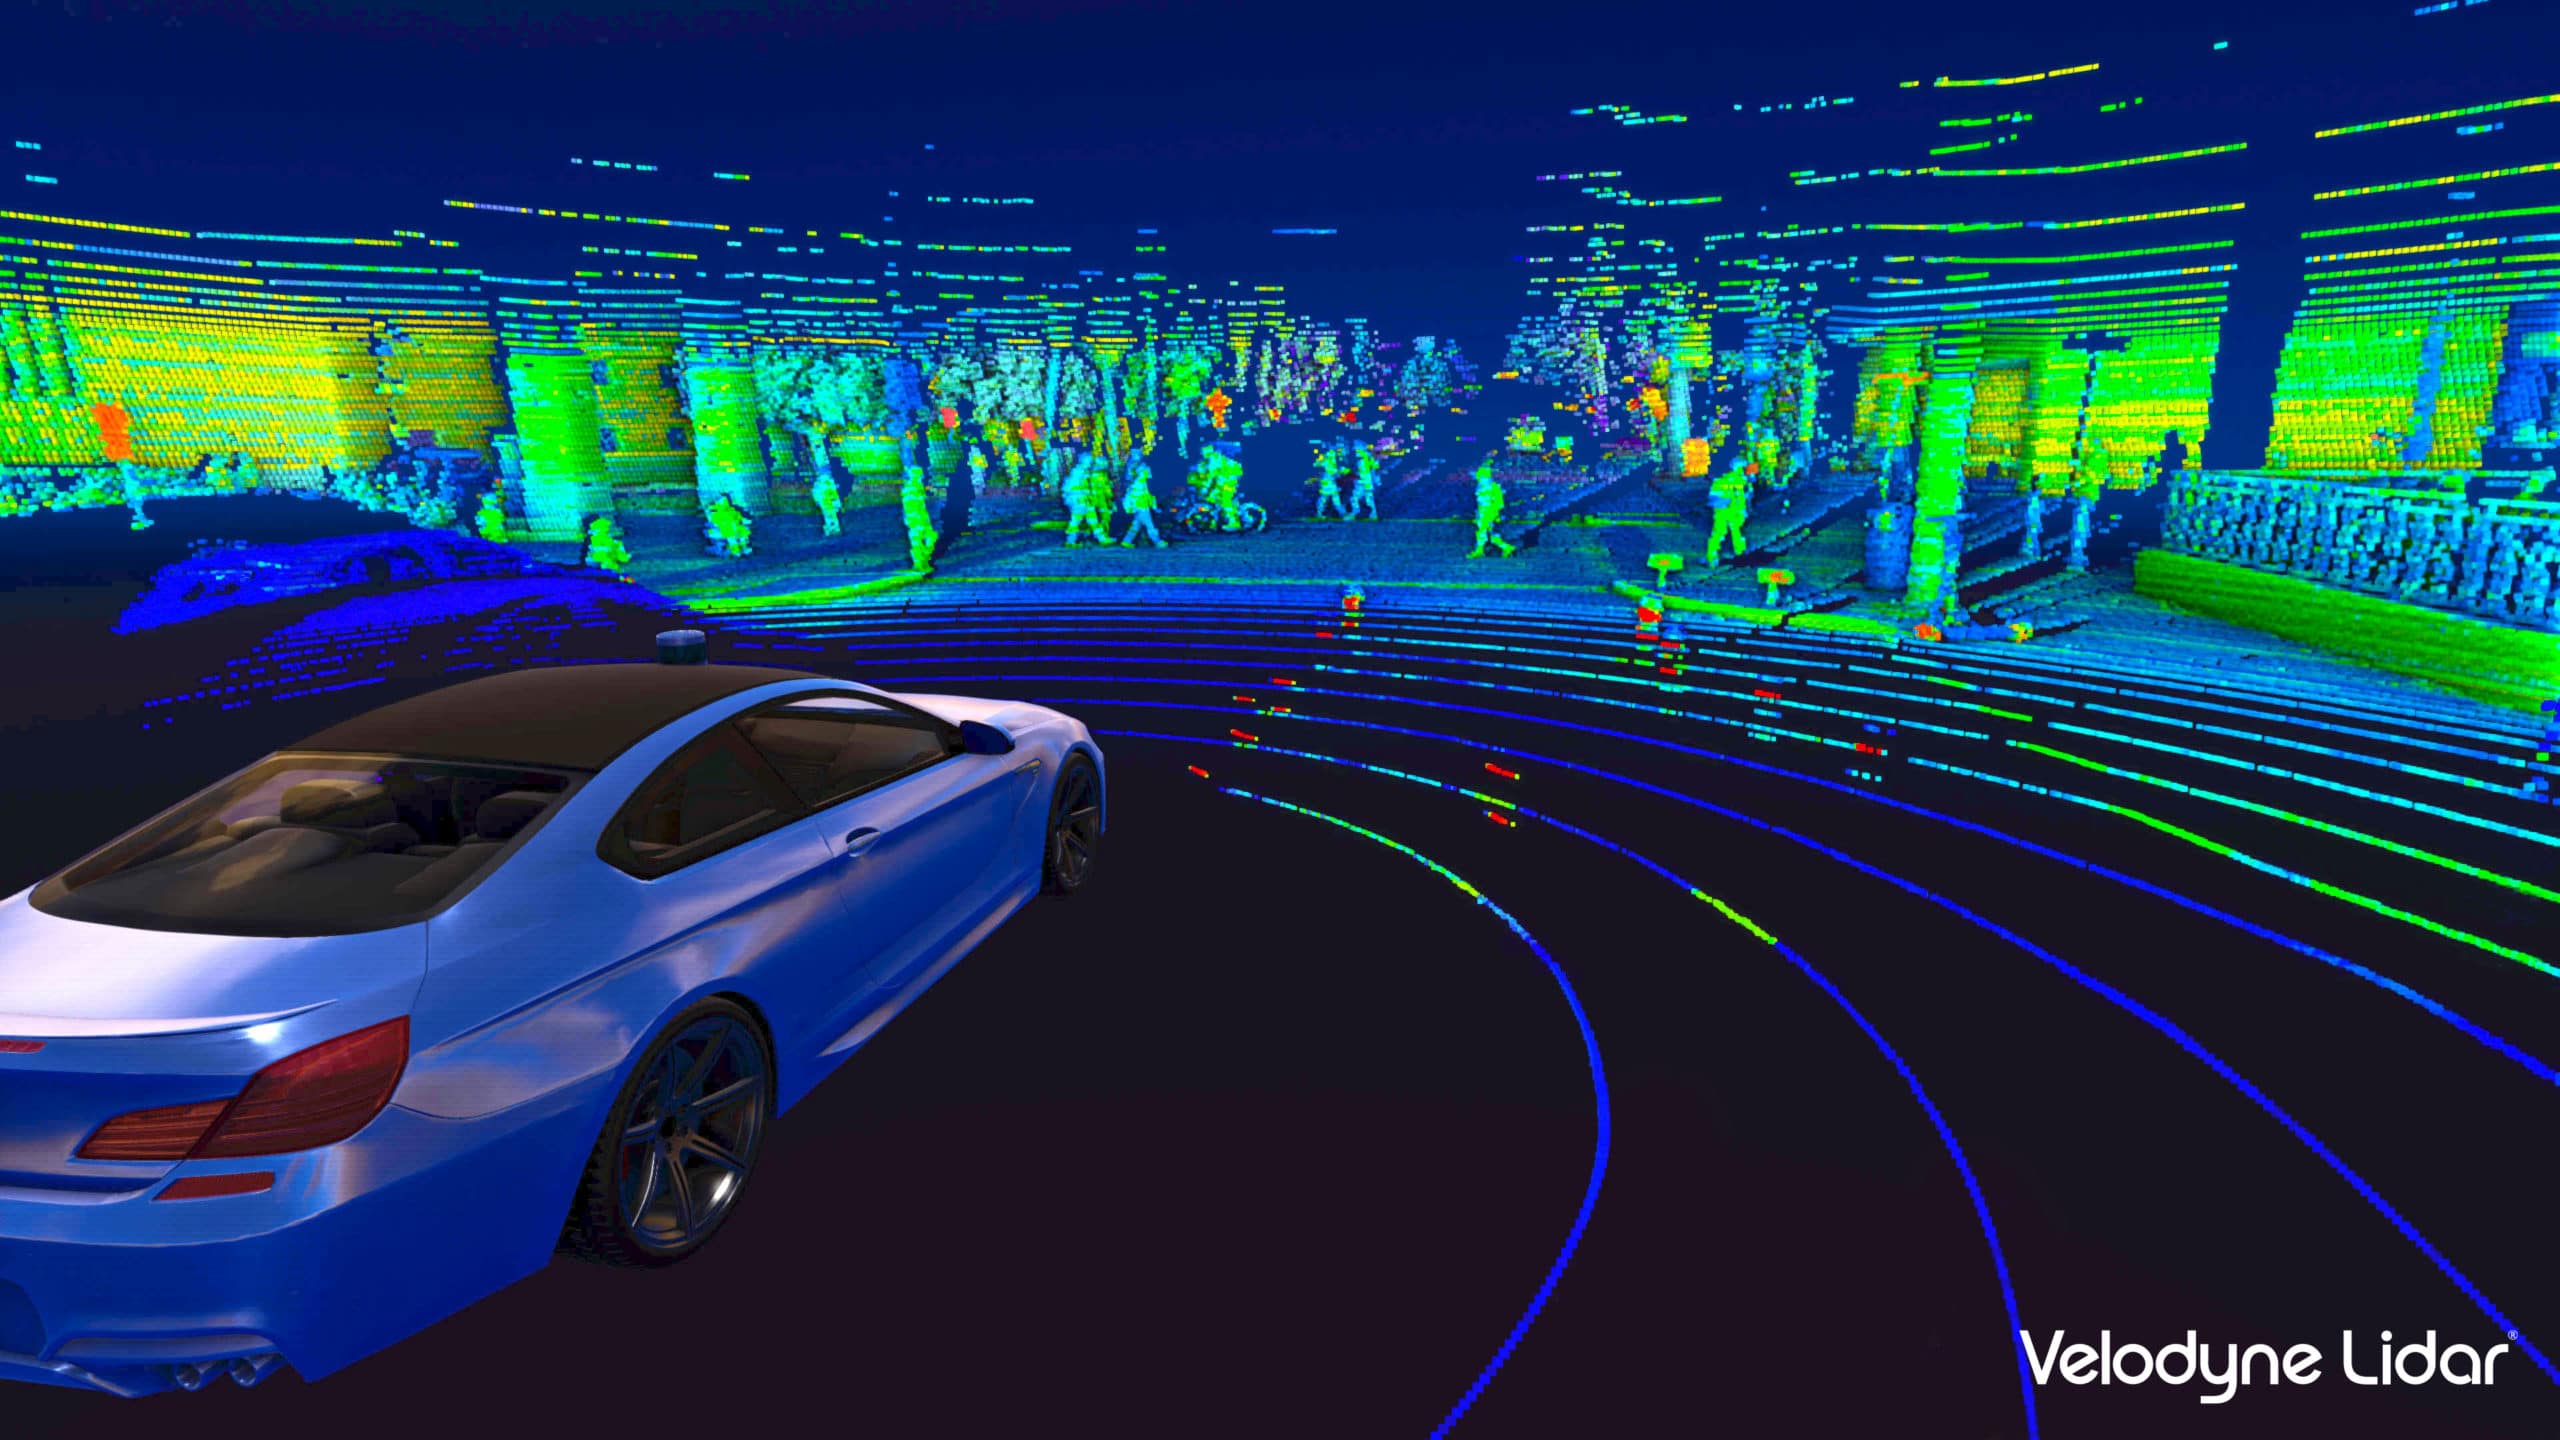 Velodyne Lidar has released a video showing how its lidar can improve pedestrian safety